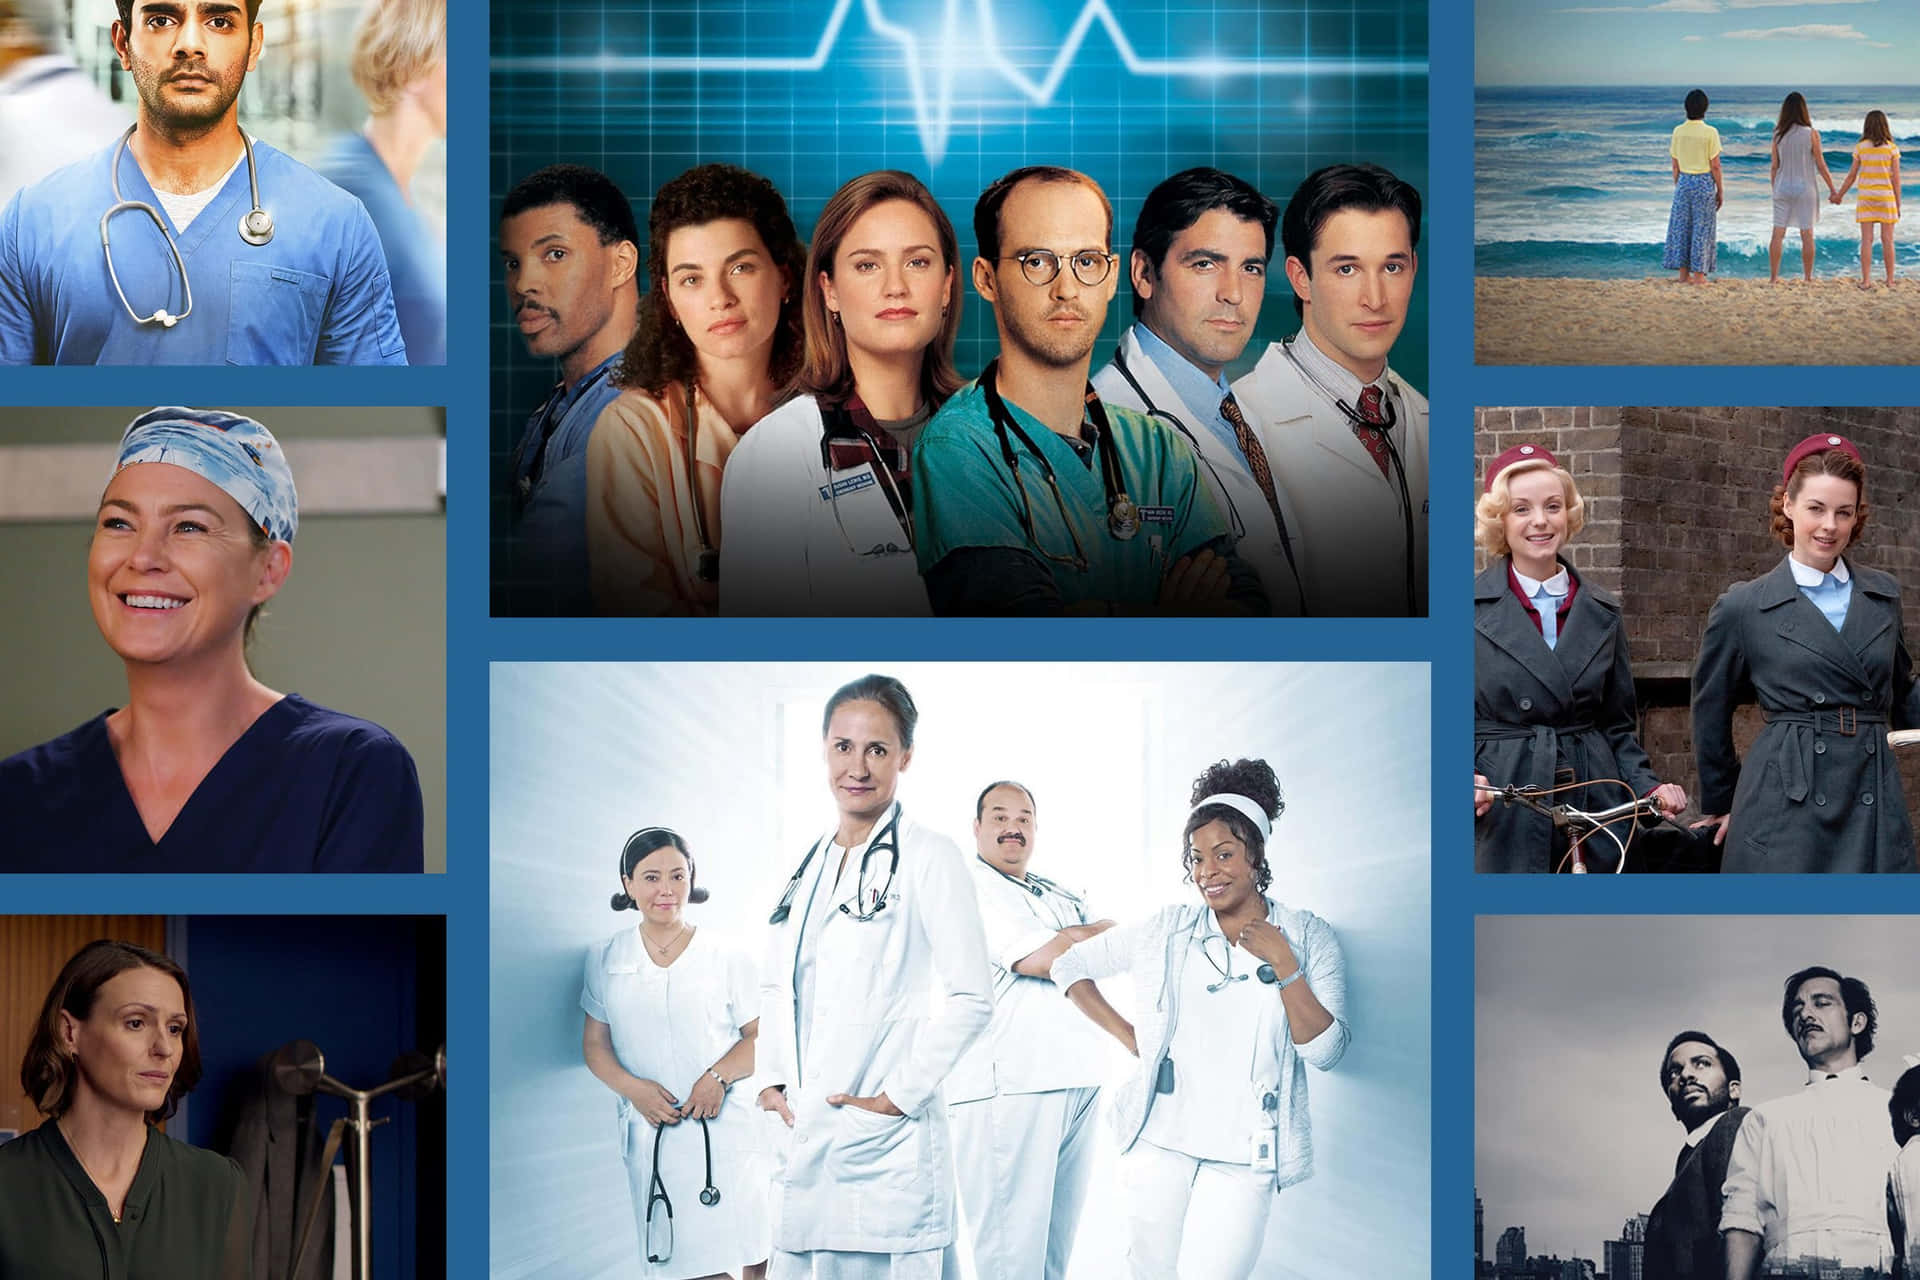 A Collage Of Pictures Of People In Medical Uniforms